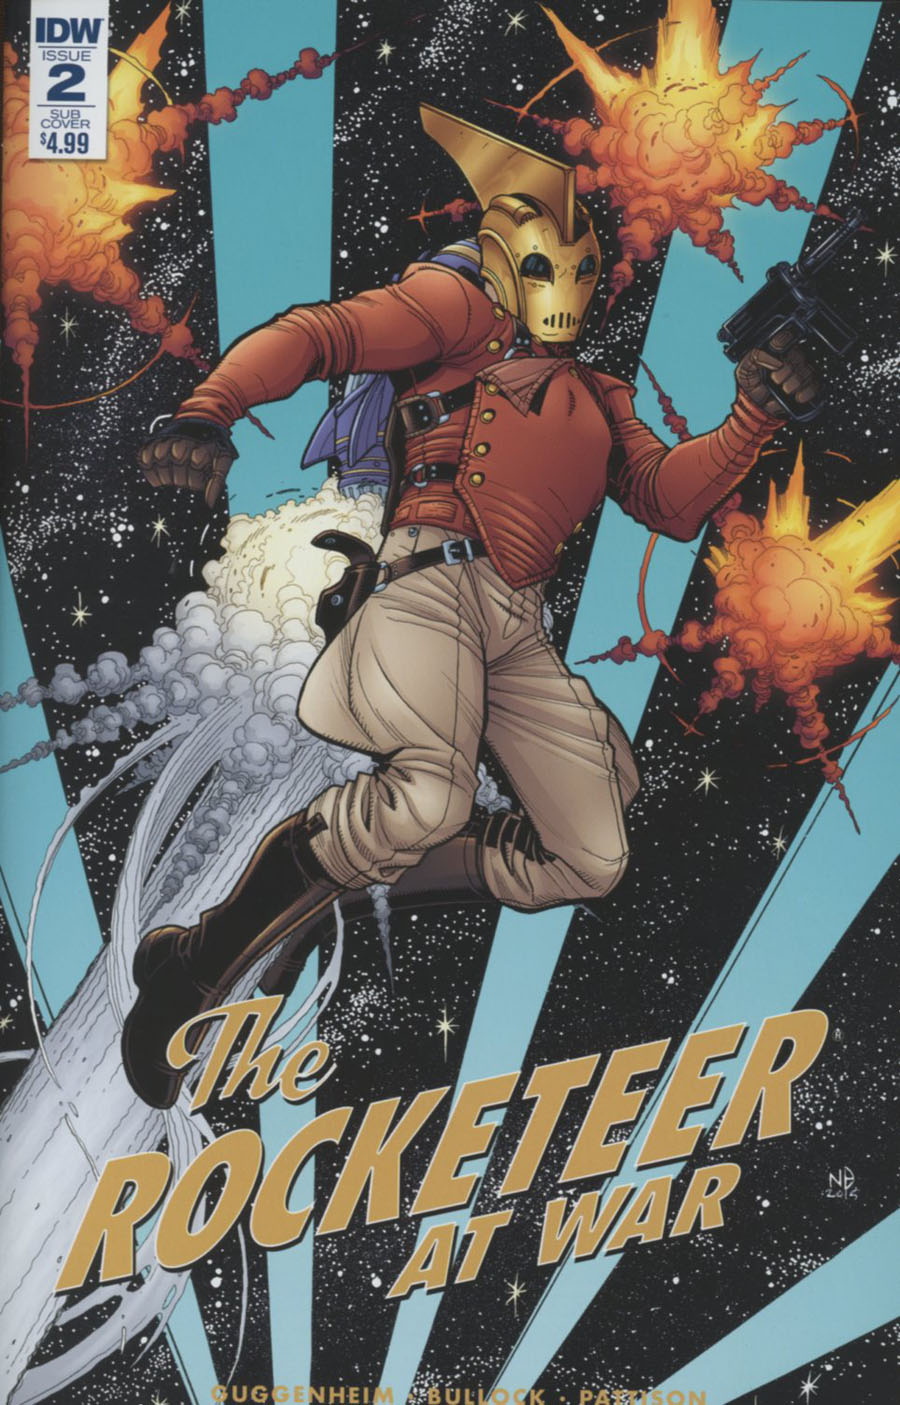 Rocketeer At War #2 Cover B Variant Nick Bradshaw Subscription Cover